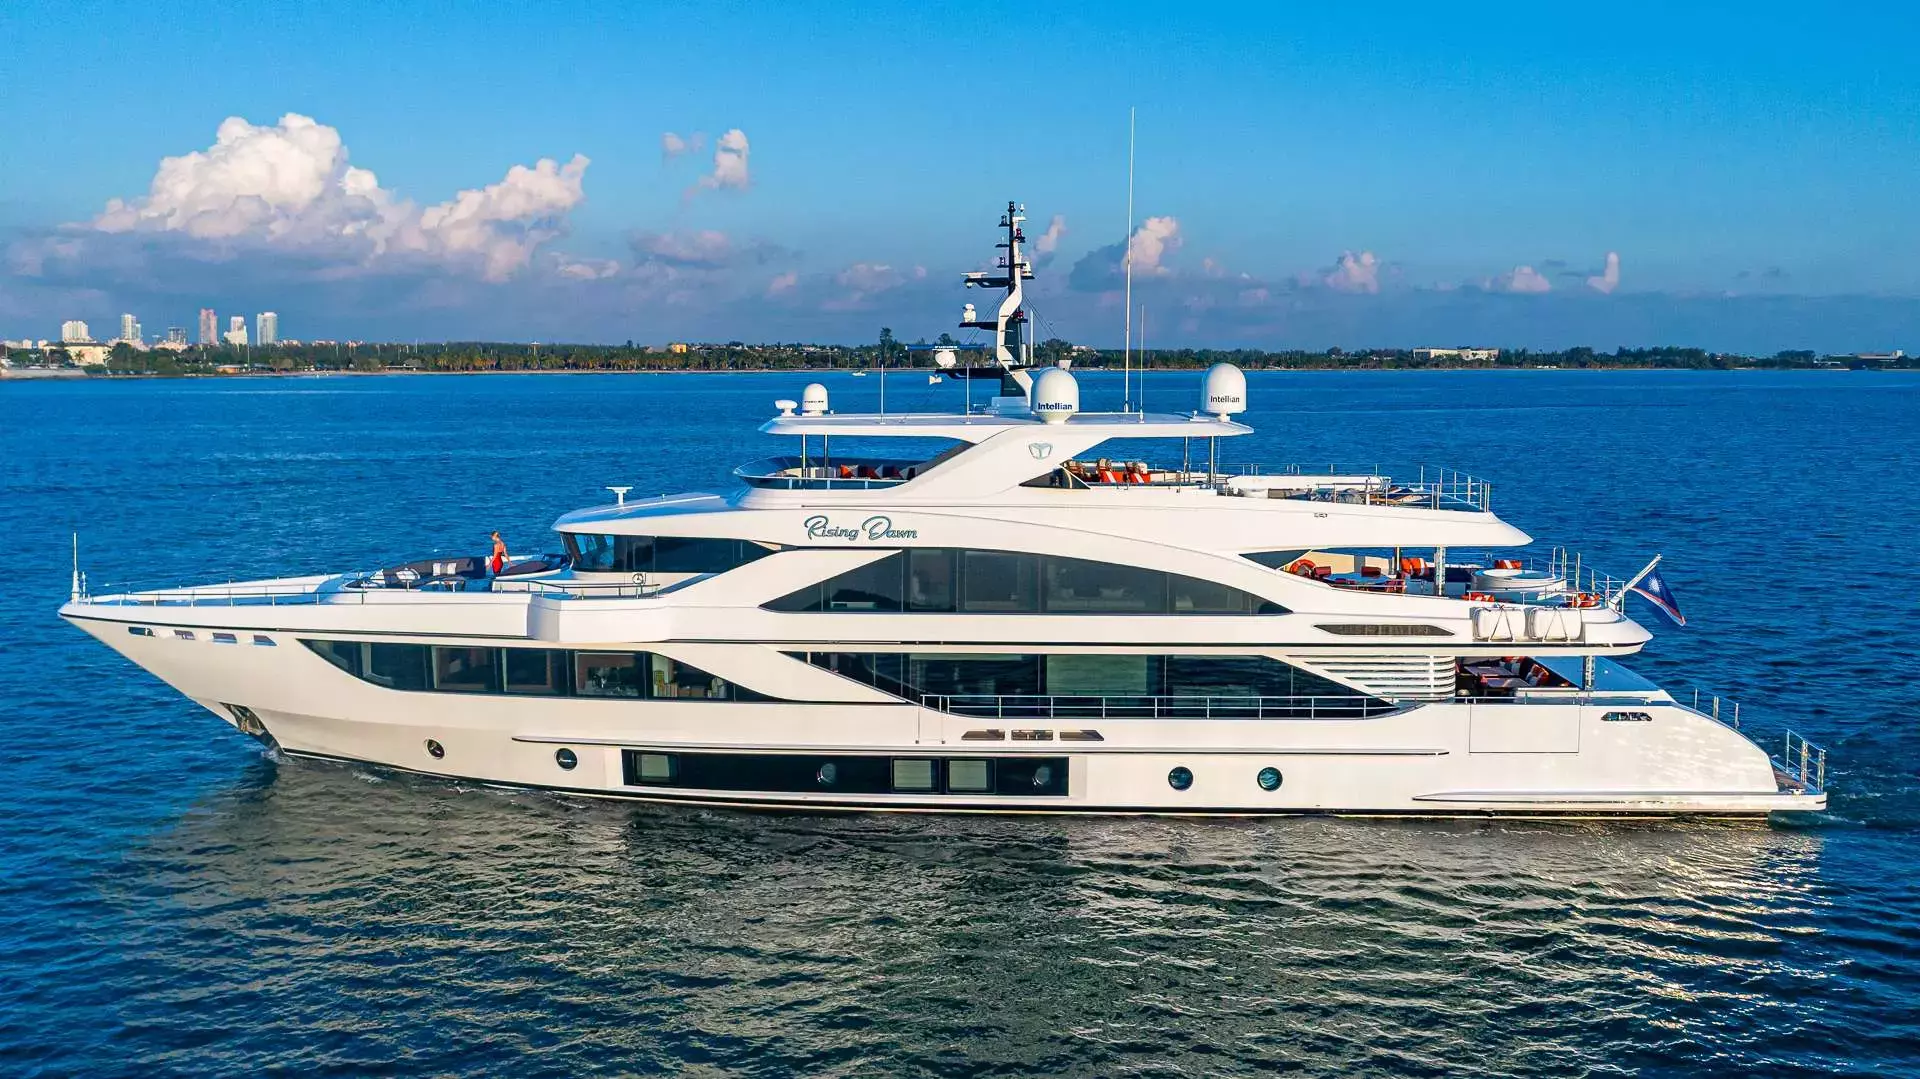 Rising Dawn by Gulf Craft - Top rates for a Charter of a private Superyacht in Anguilla